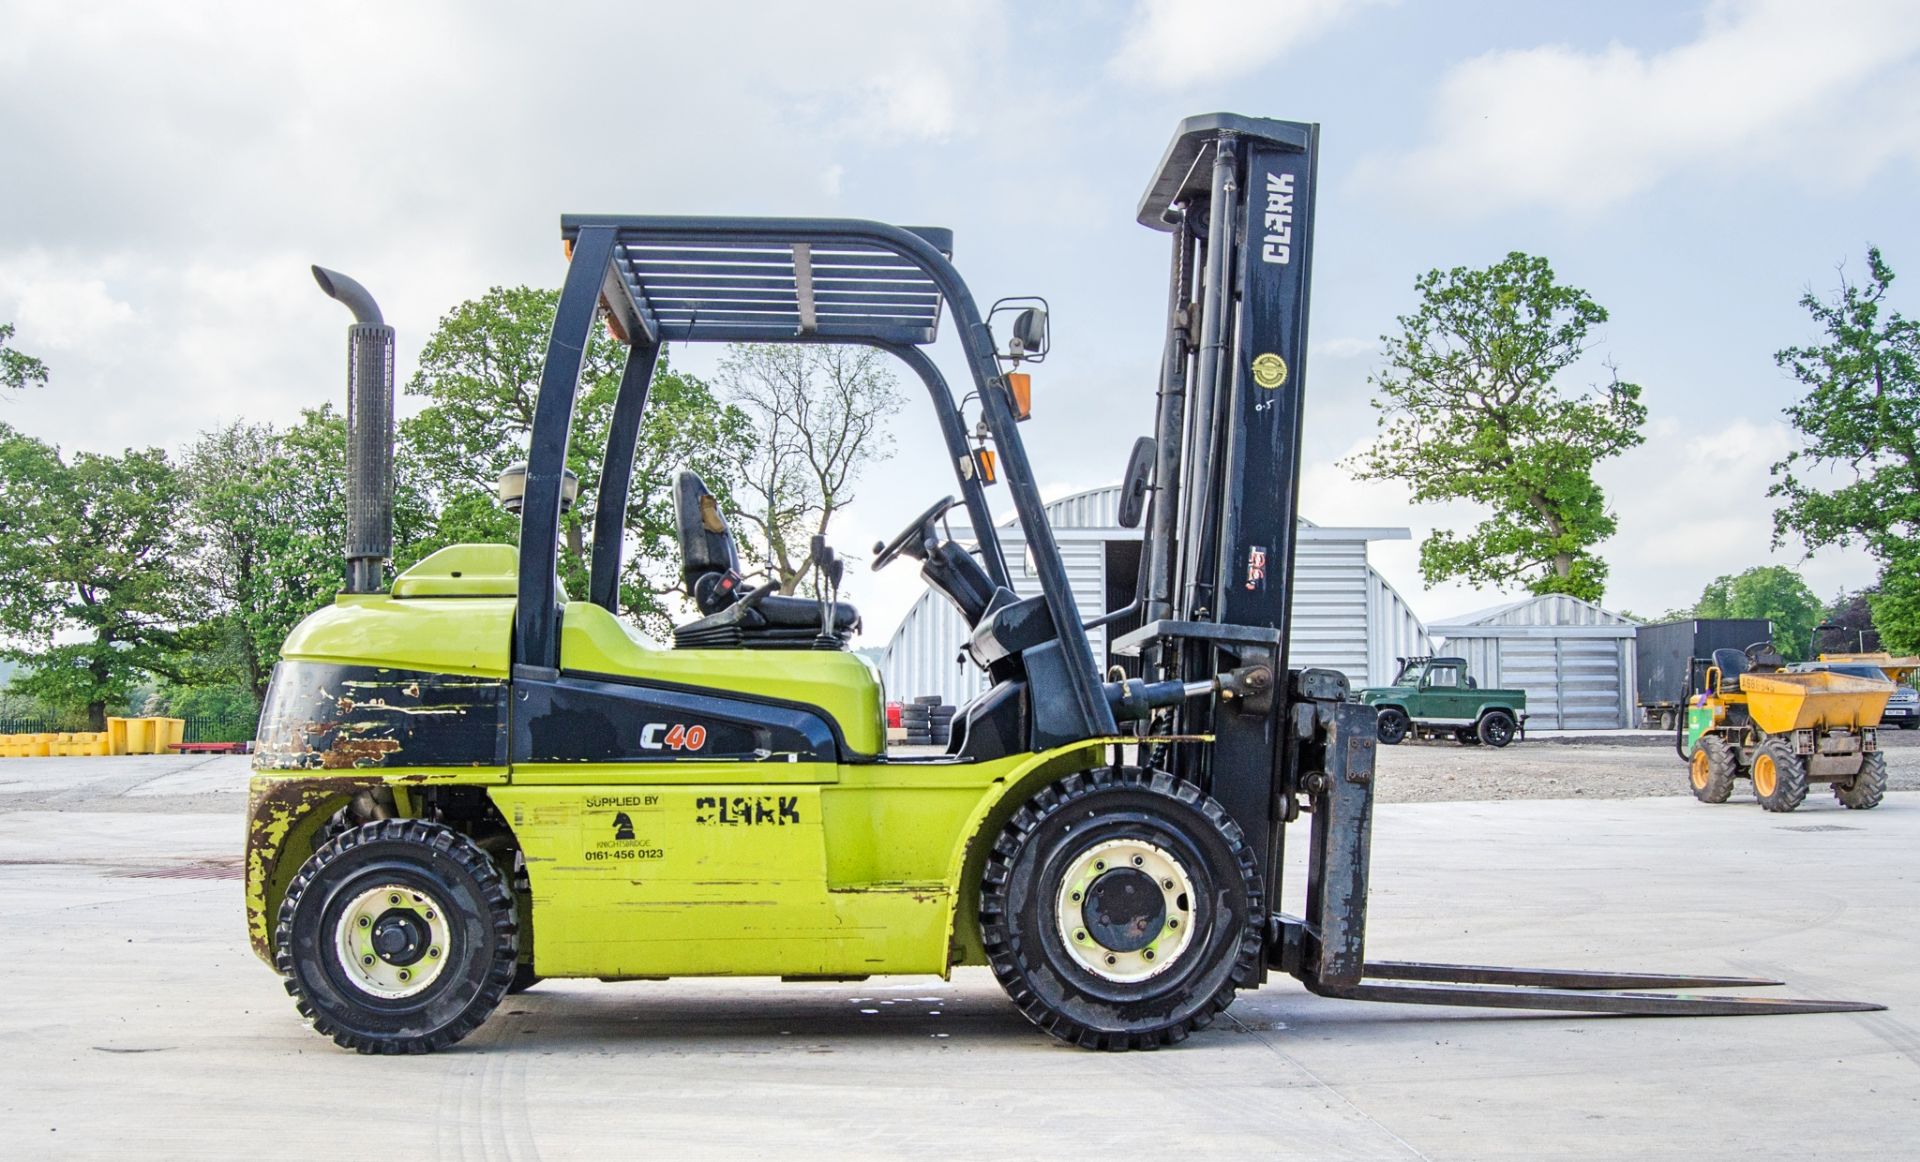 Clark C40D 4 tonne diesel driven fork lift truck Year: 2014 S/N: 9913 Recorded Hours: 4484 N628404 - Image 7 of 21